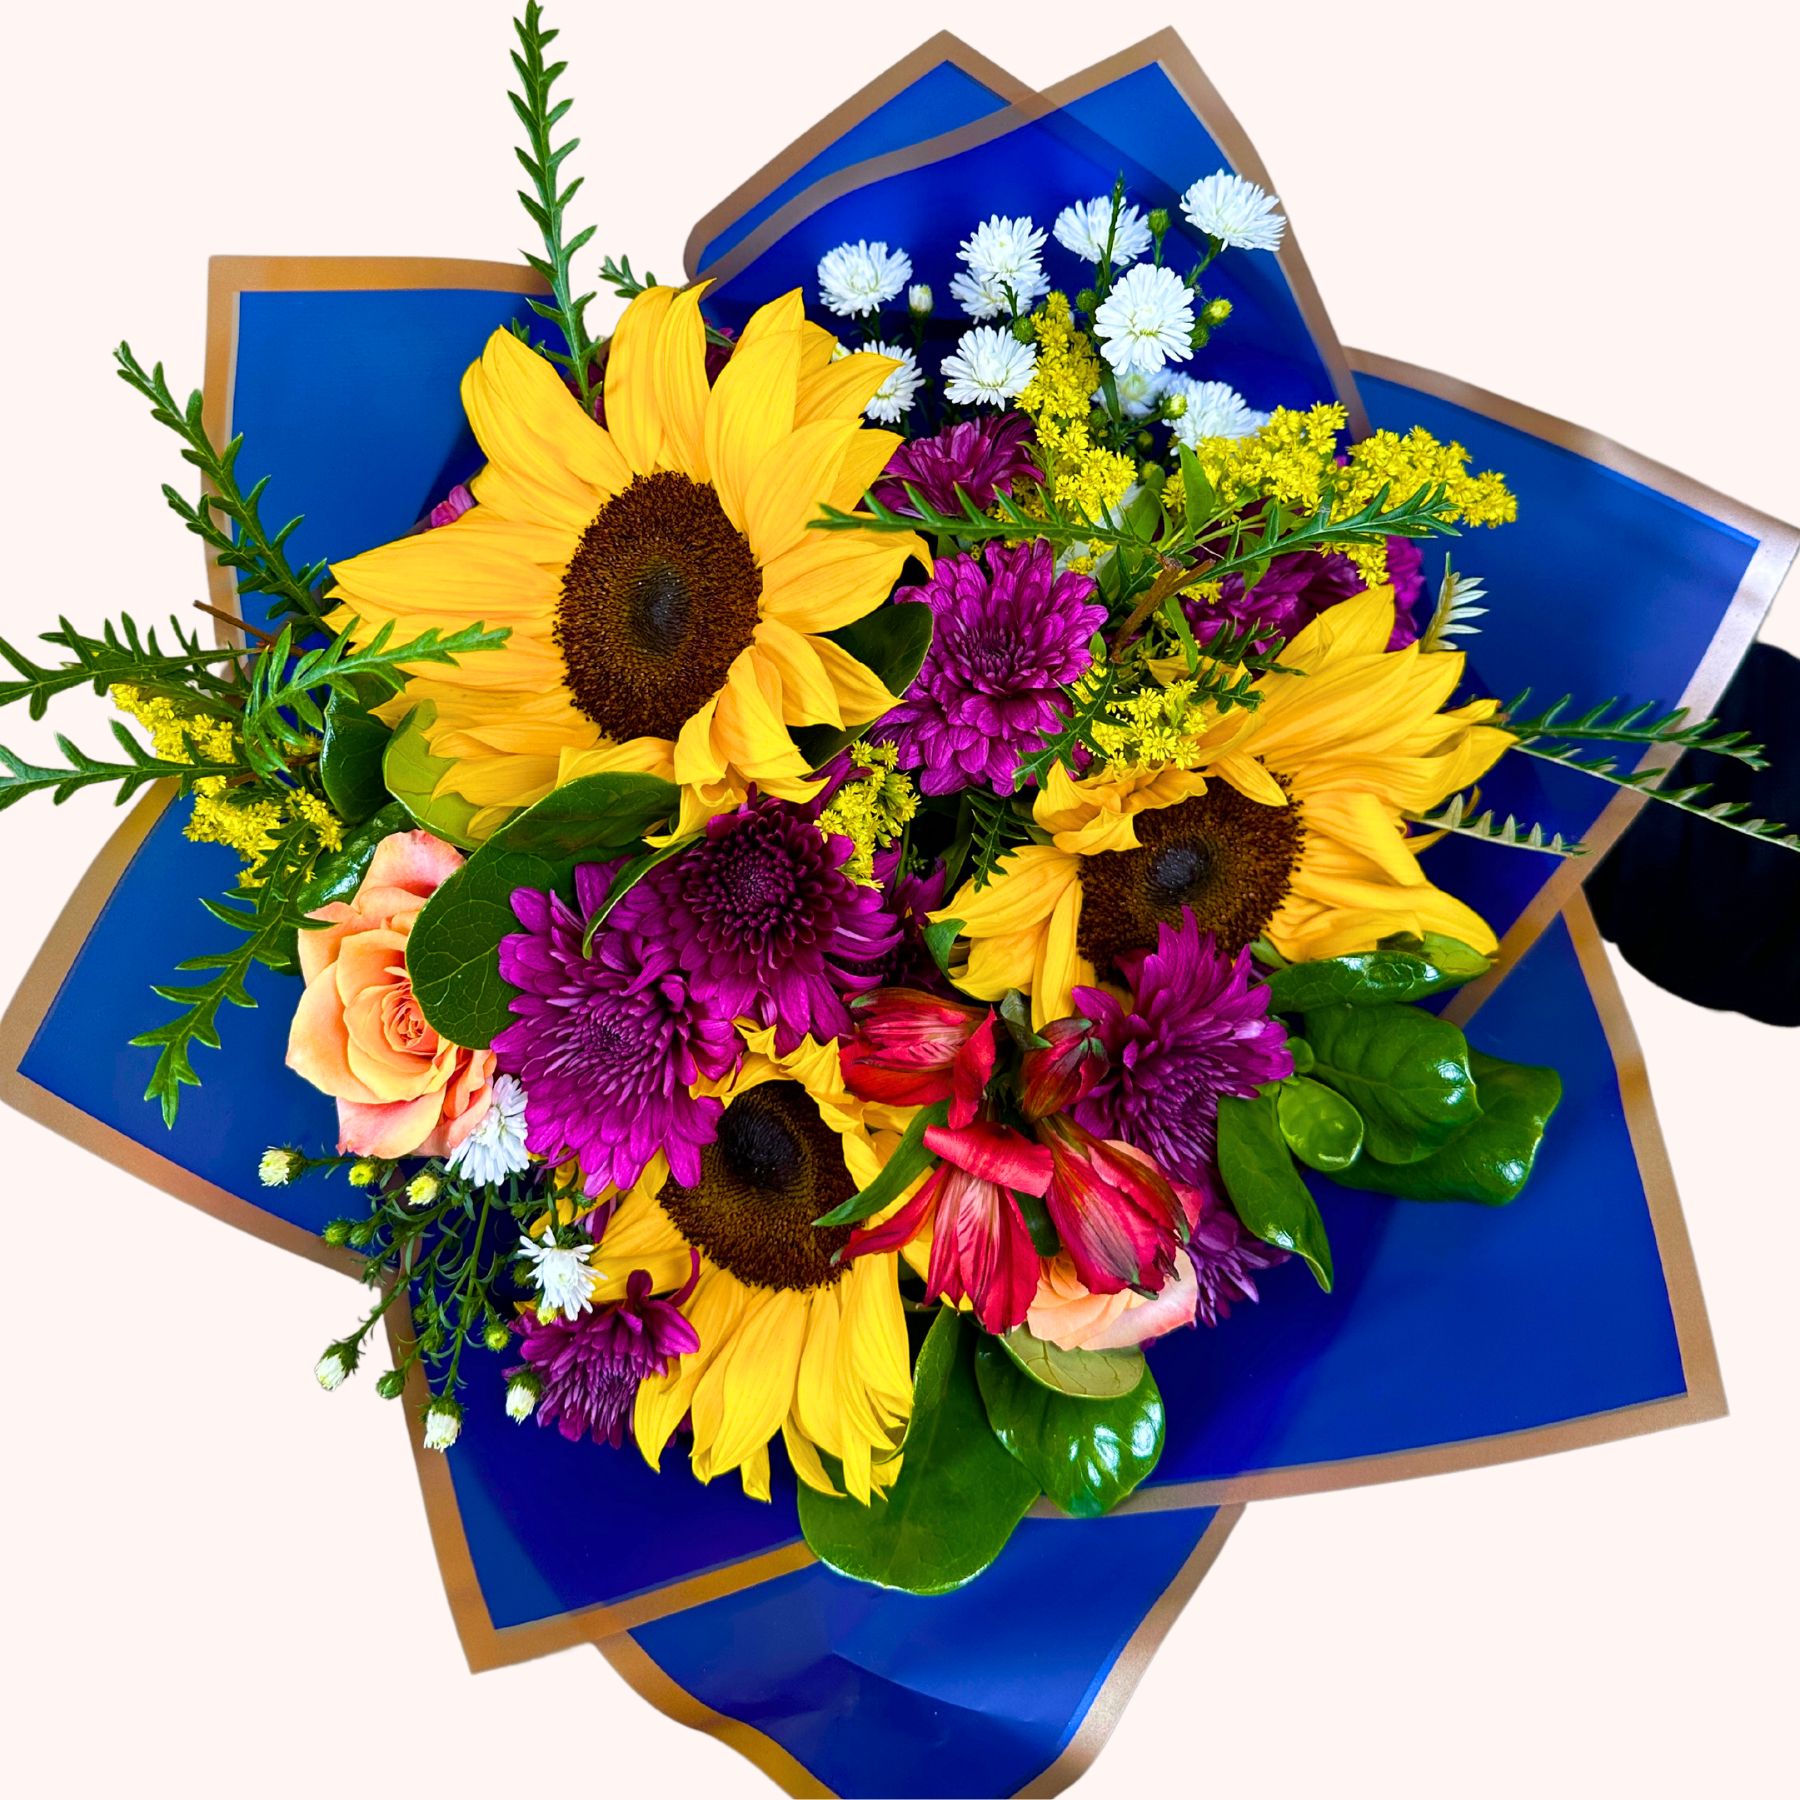 Blooming Sunshine Flower Bouquet featuring sunflowers, purple chrysanthemums, pink alstroemerias, orange roses, and white daisies - Fabulous Flowers and Gifts